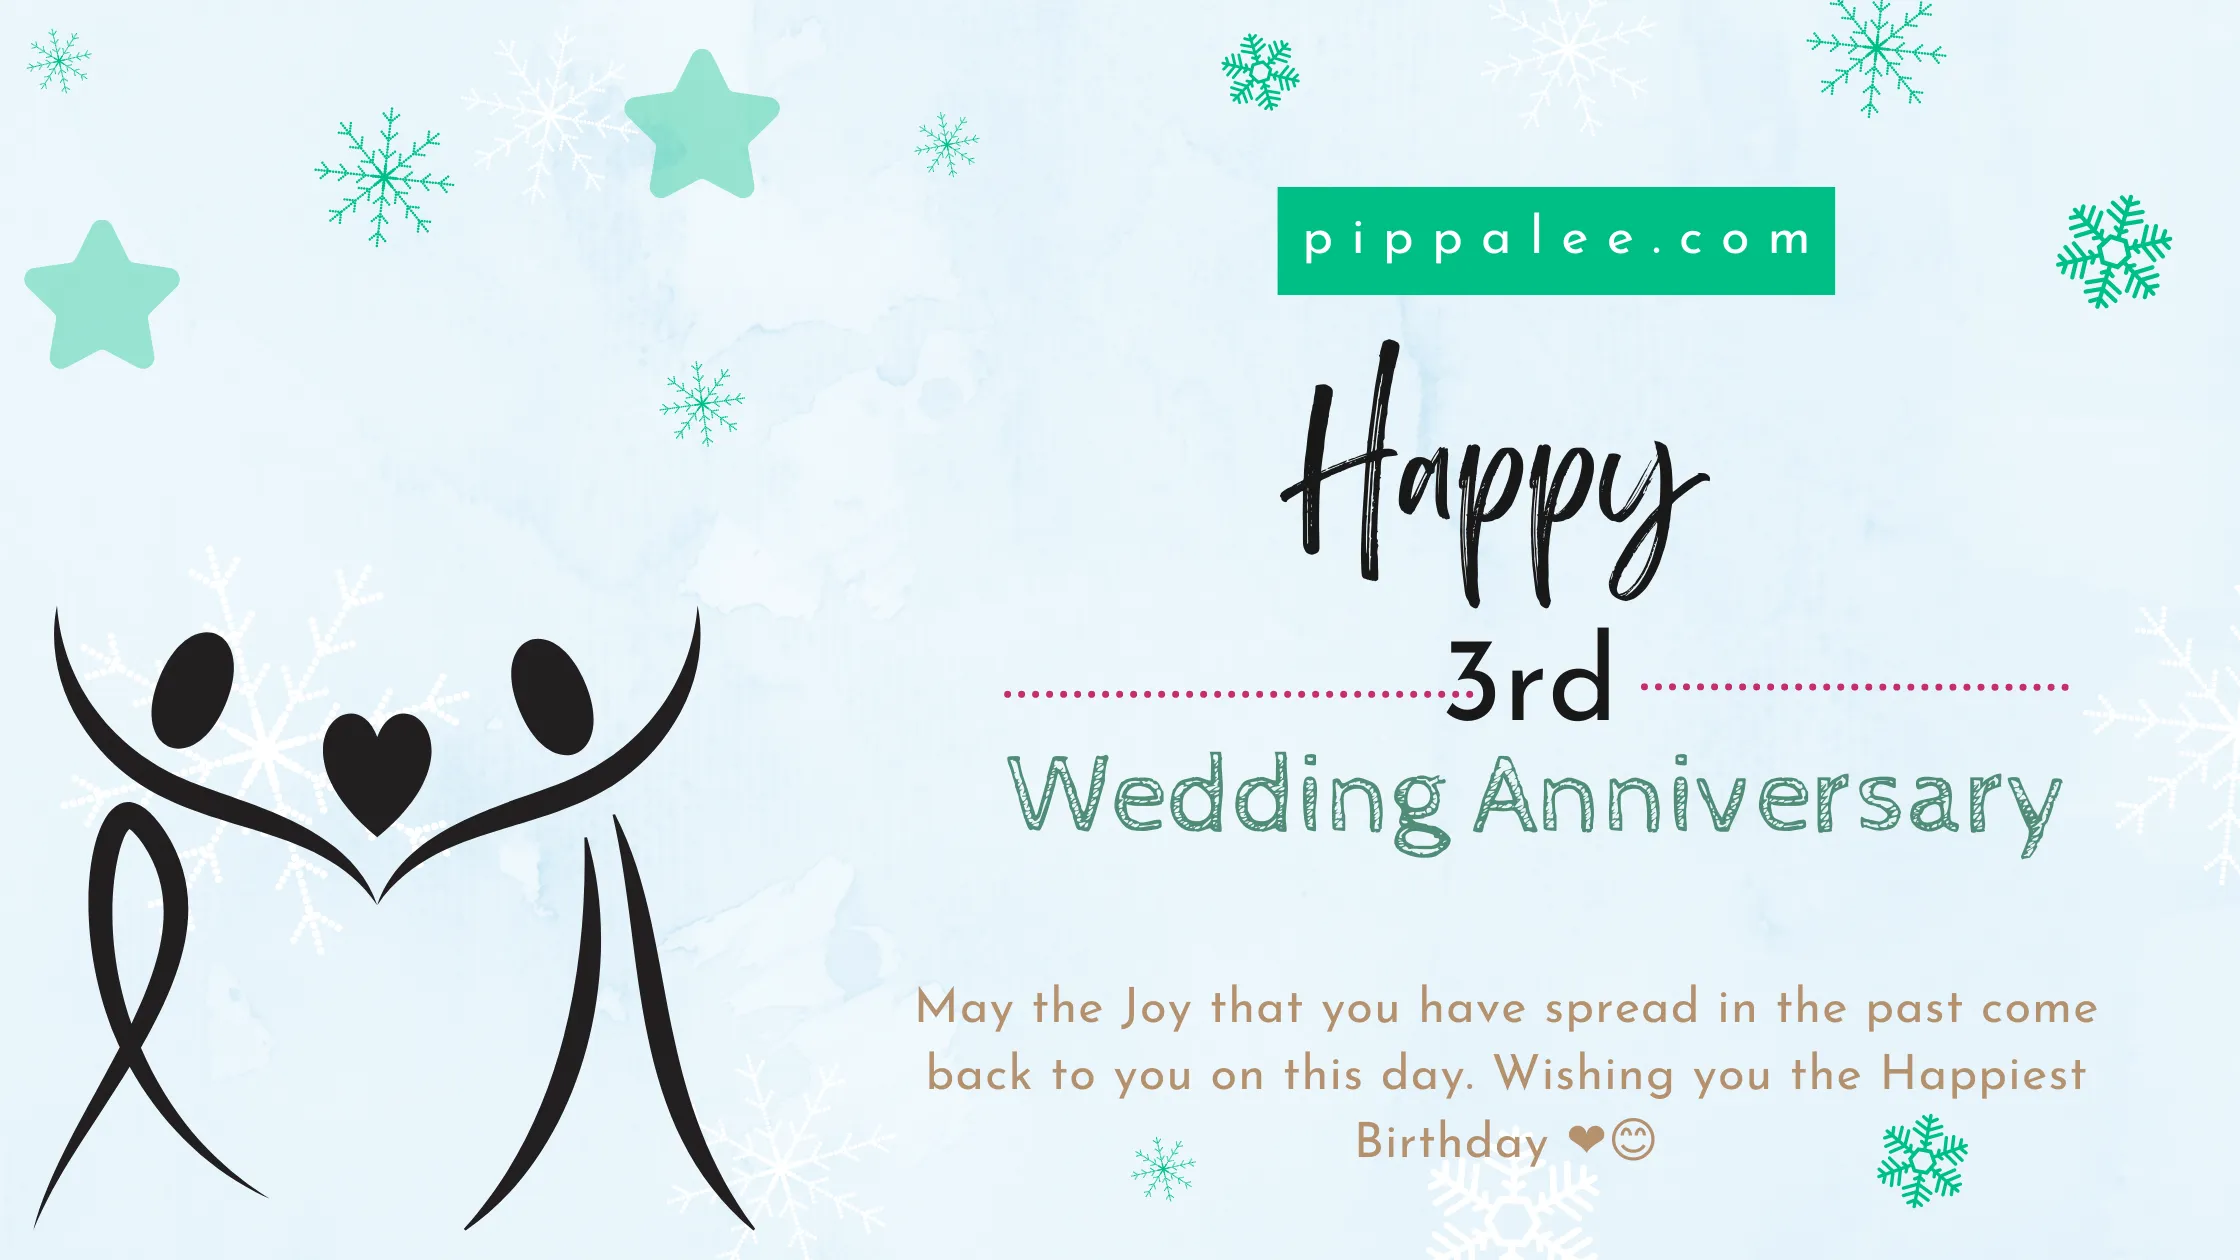 3rd Wedding Anniversary - Wishes & Messages